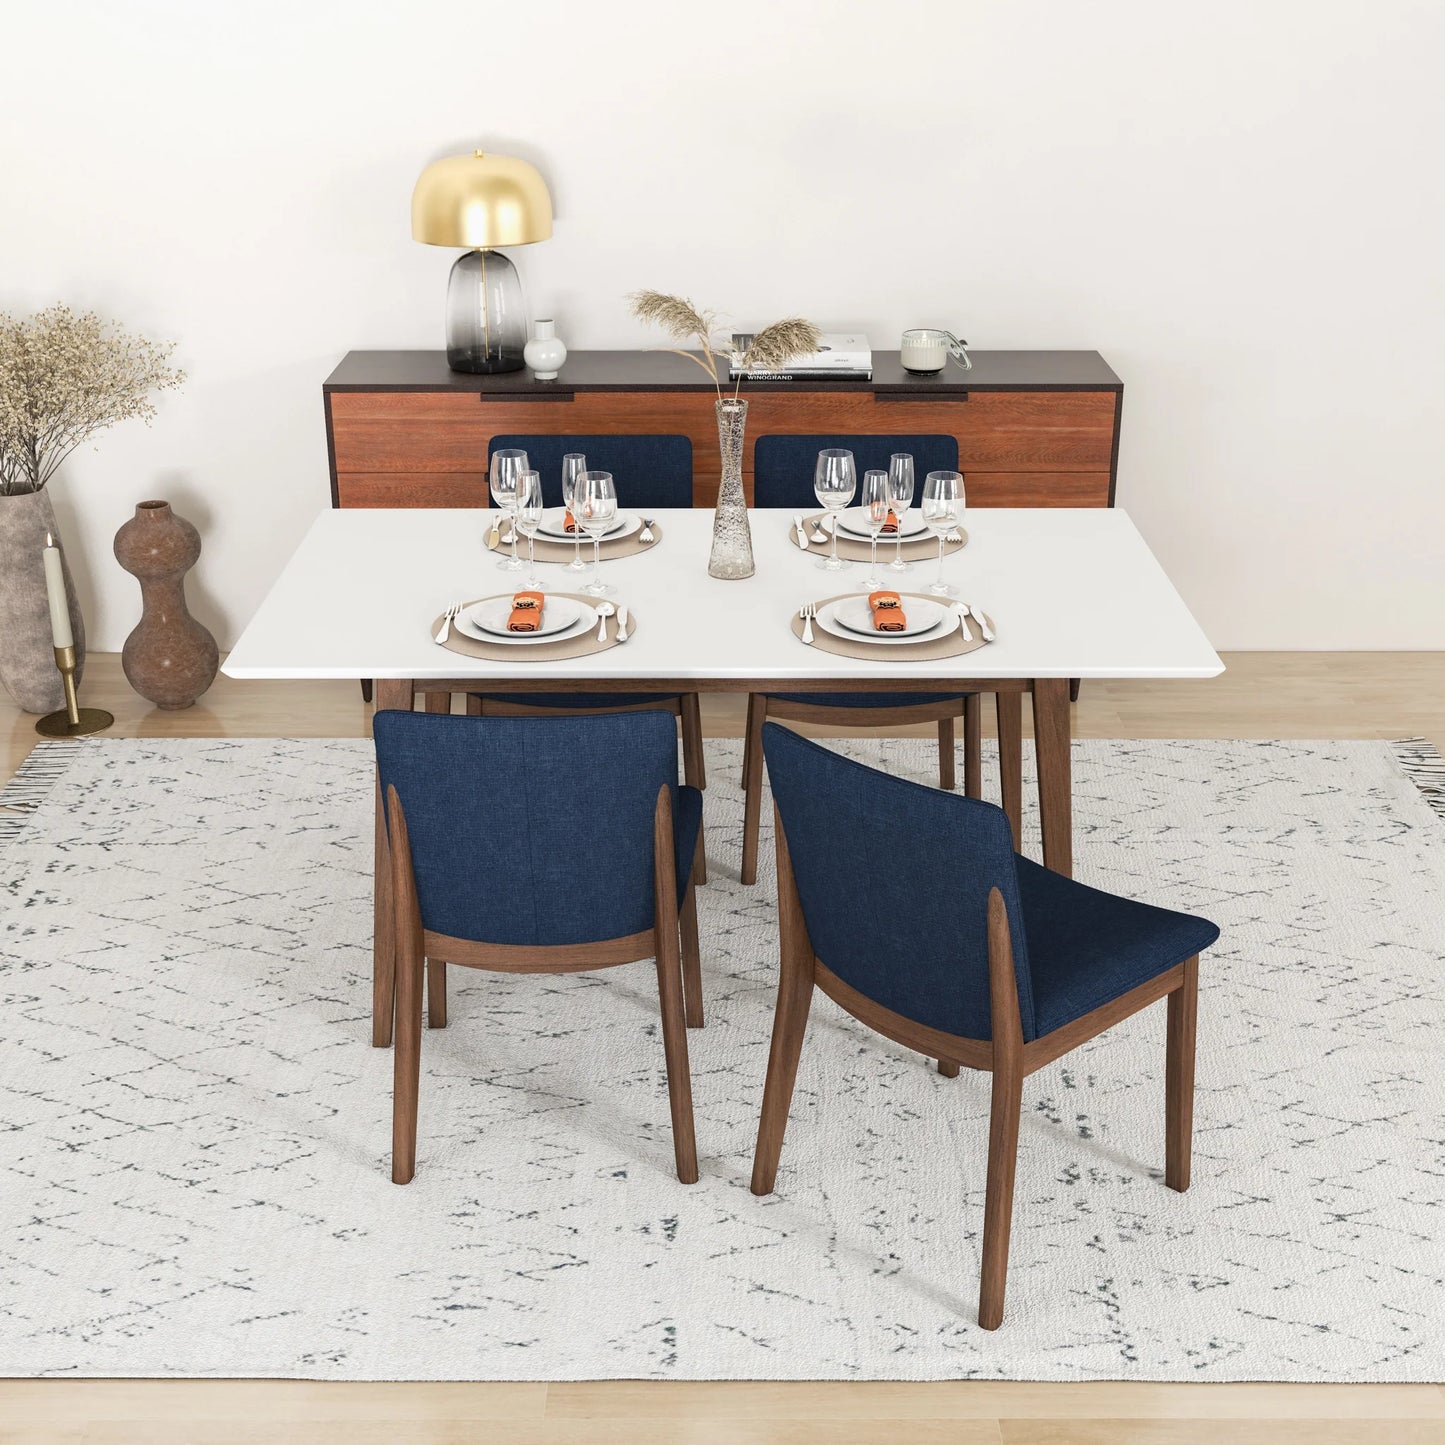 Dining Set, Alpine Large White Table with 4 Virginia Dark Blue Chairs